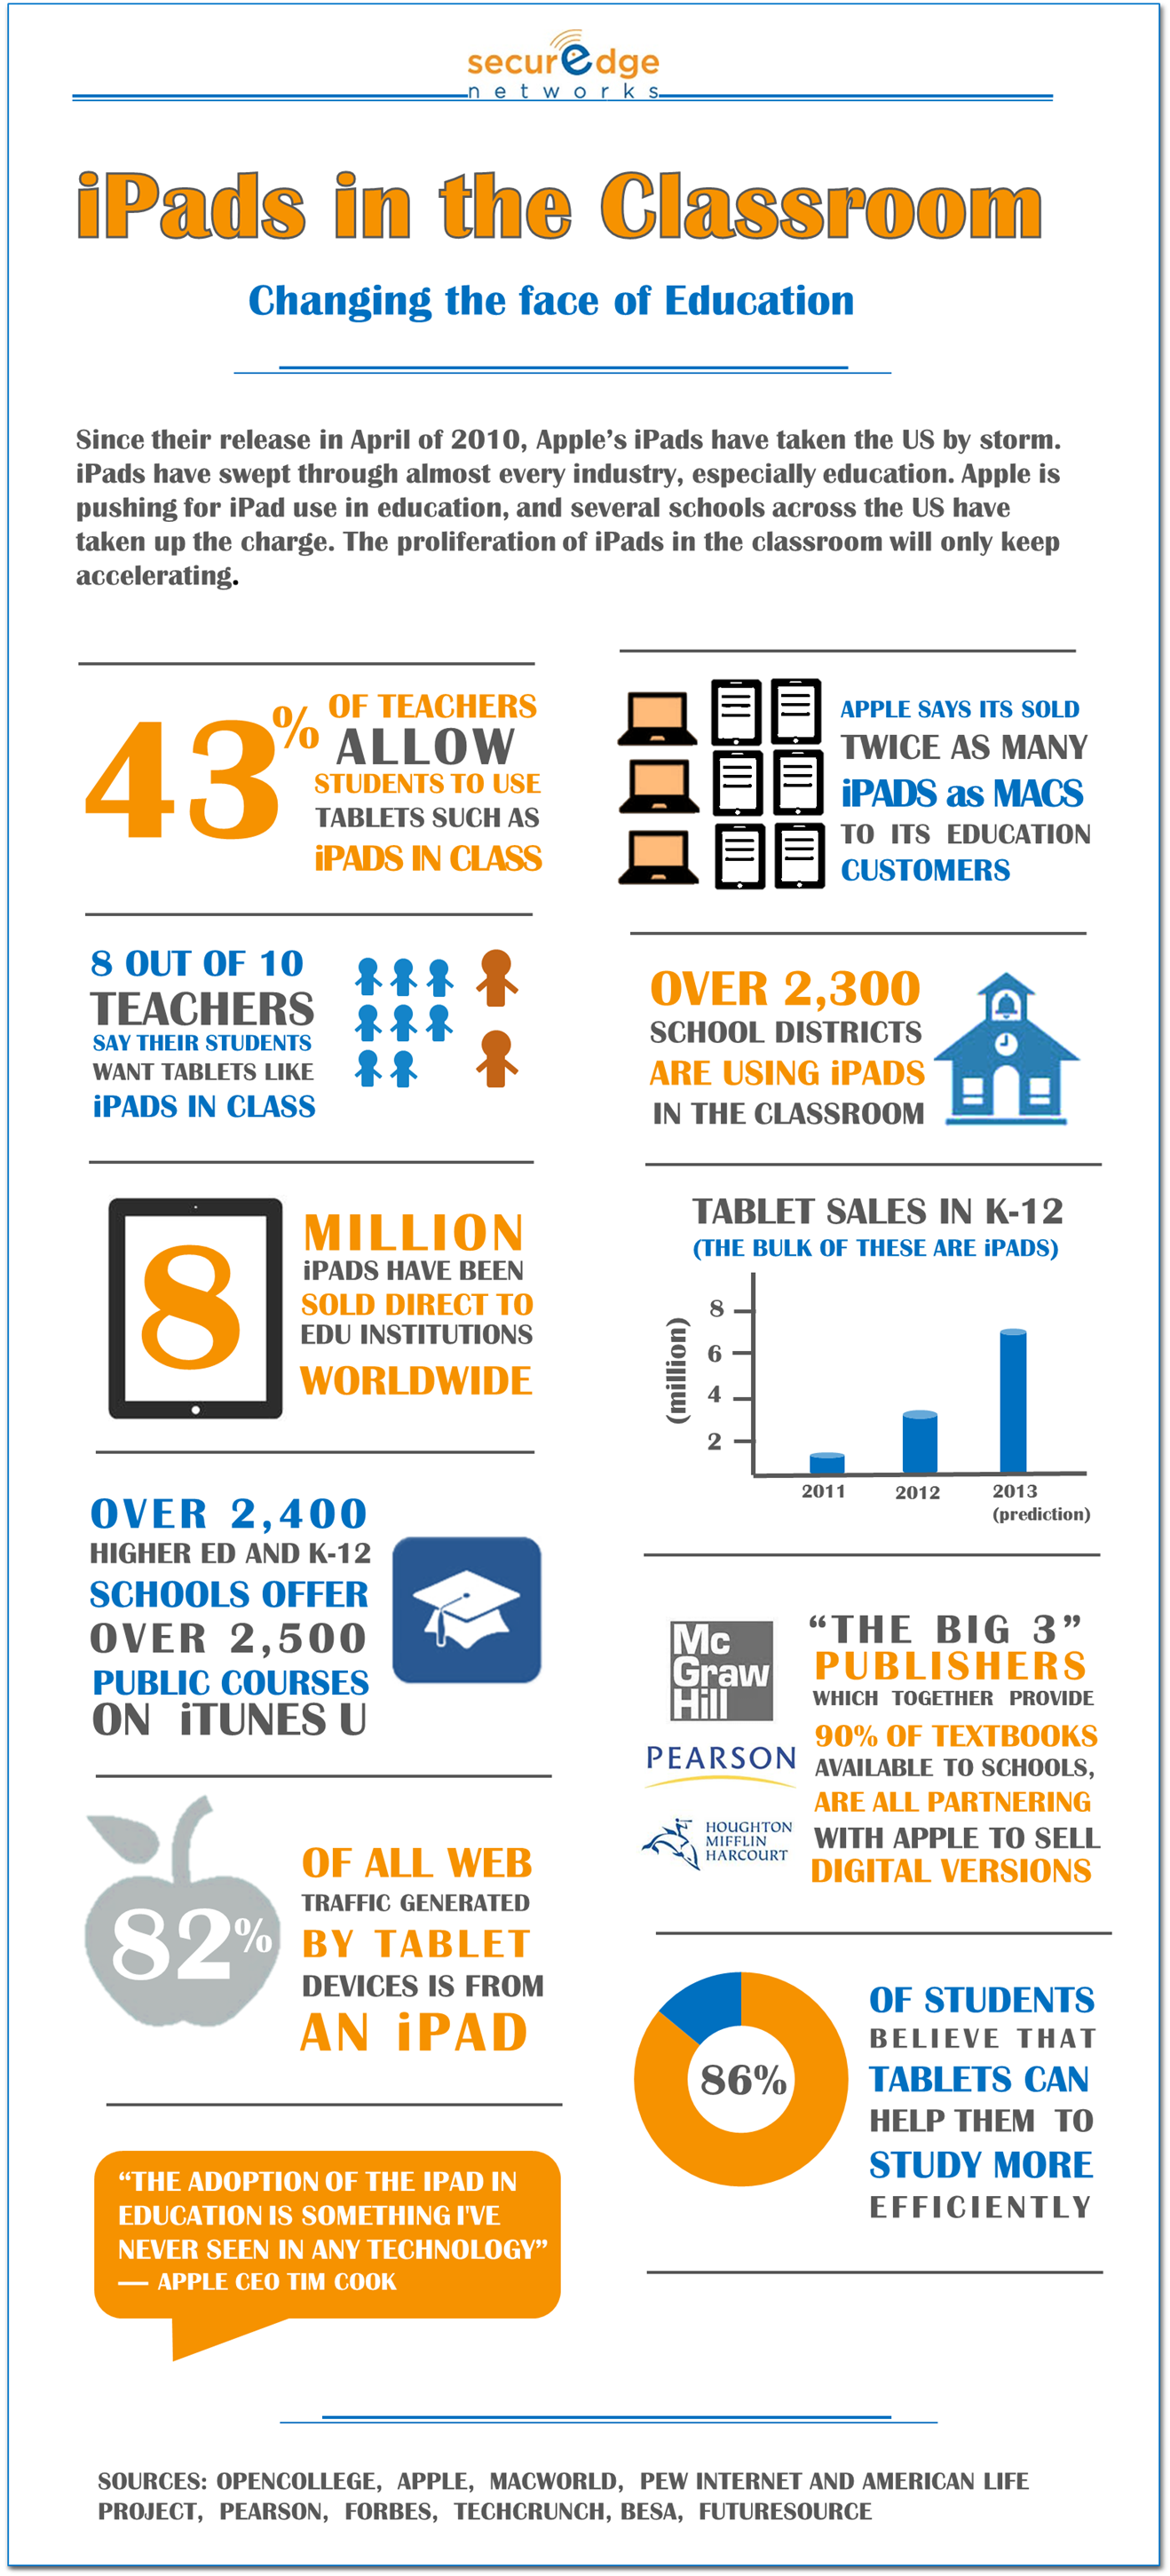 iPads in the Classroom: Changing the Face of Education Infographic